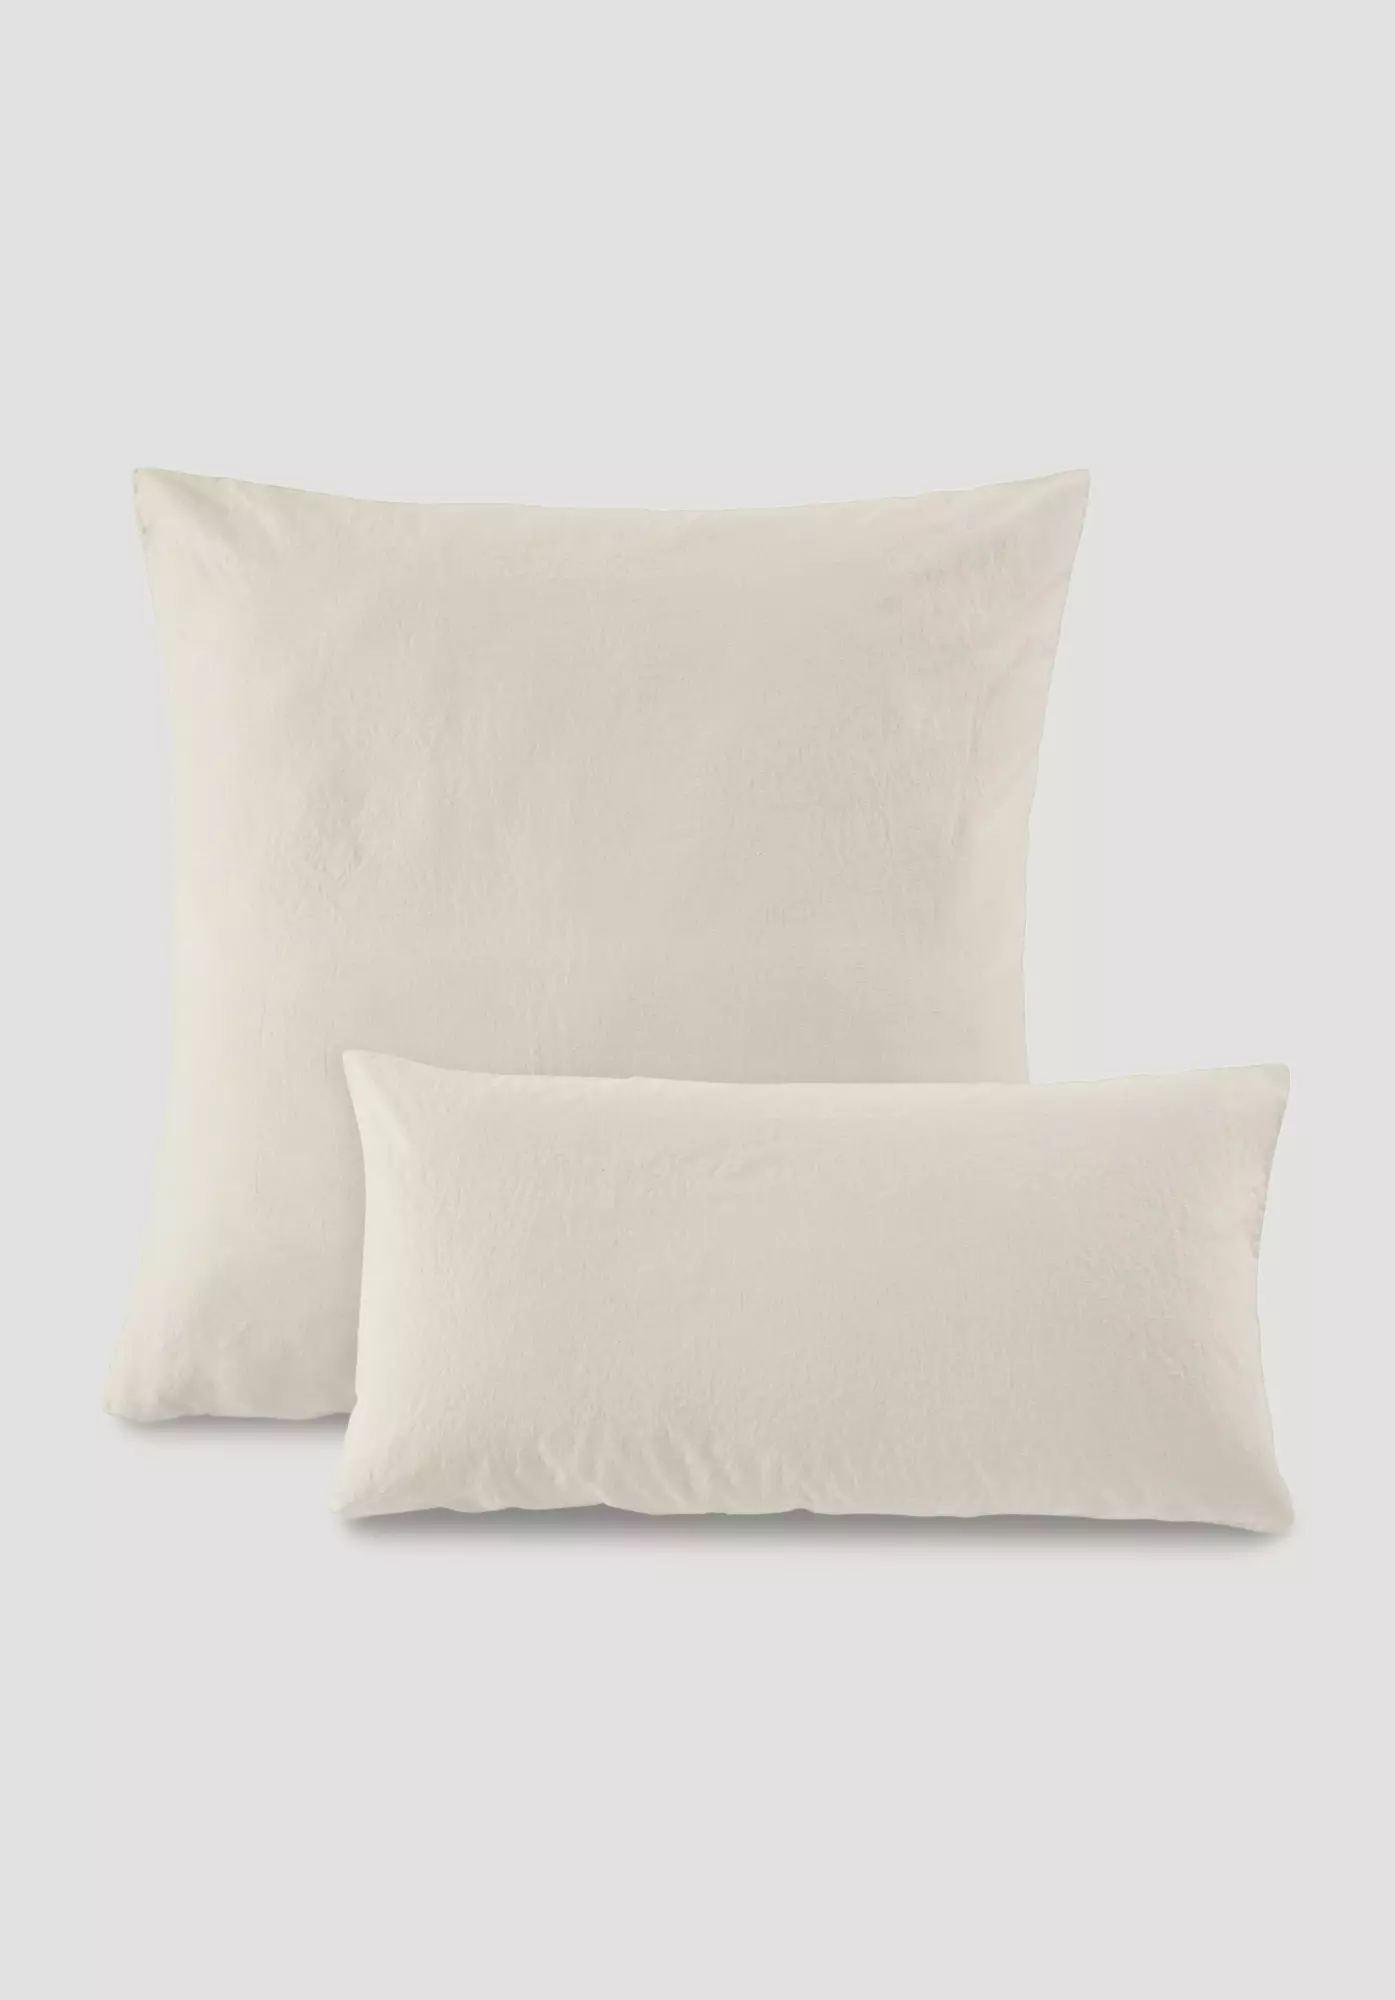 Cushion cover made from pure organic linen - 0